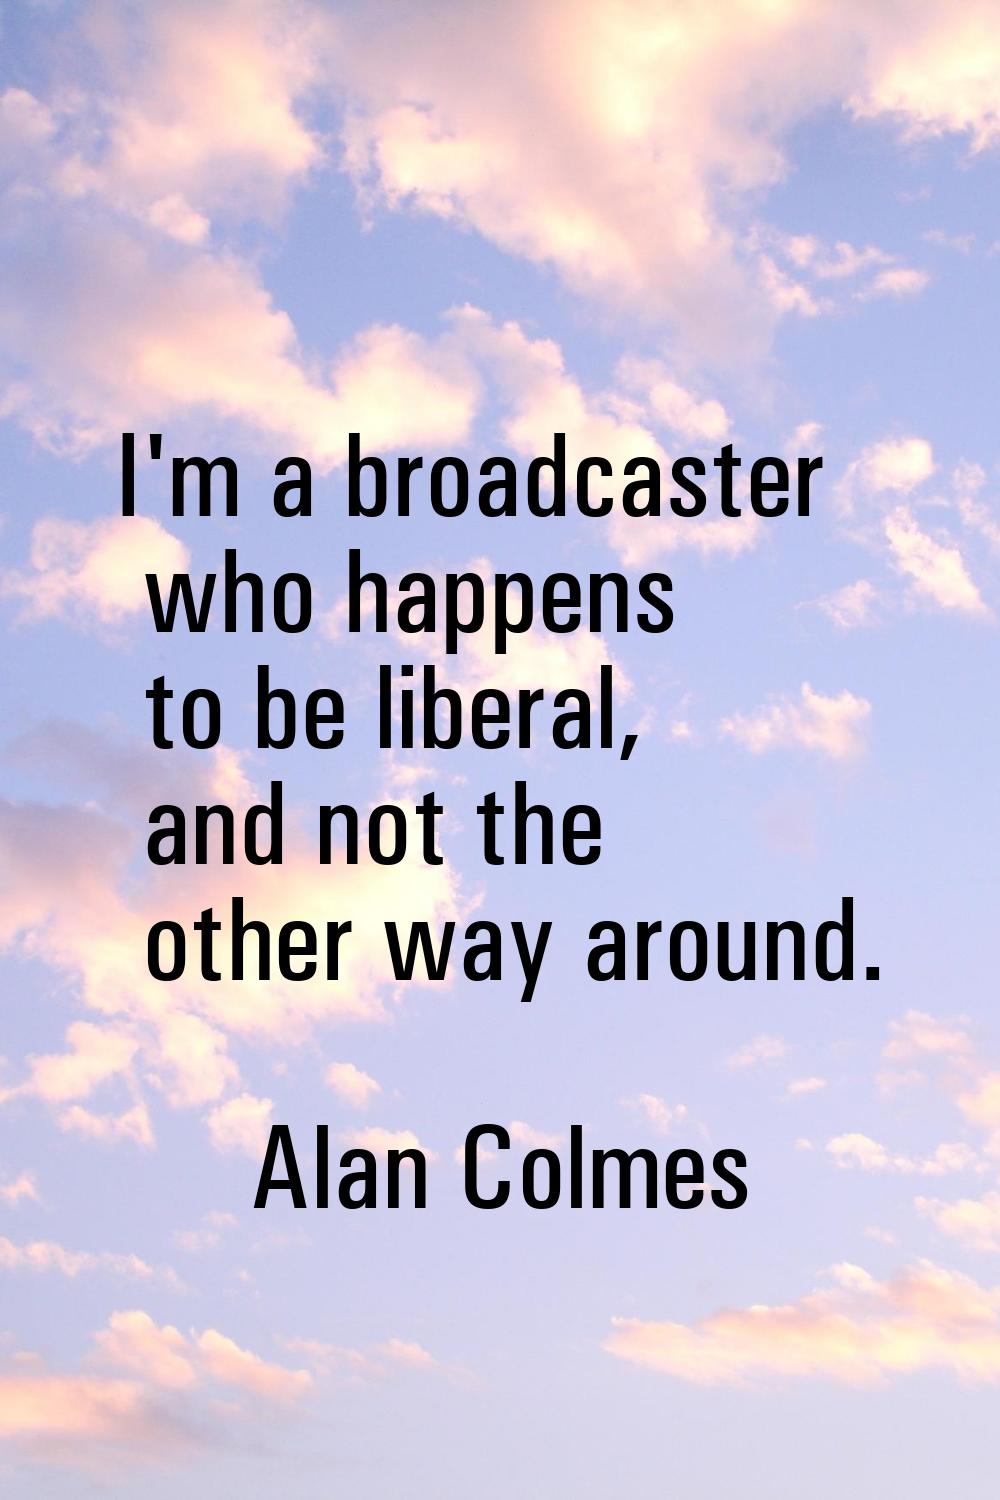 I'm a broadcaster who happens to be liberal, and not the other way around.